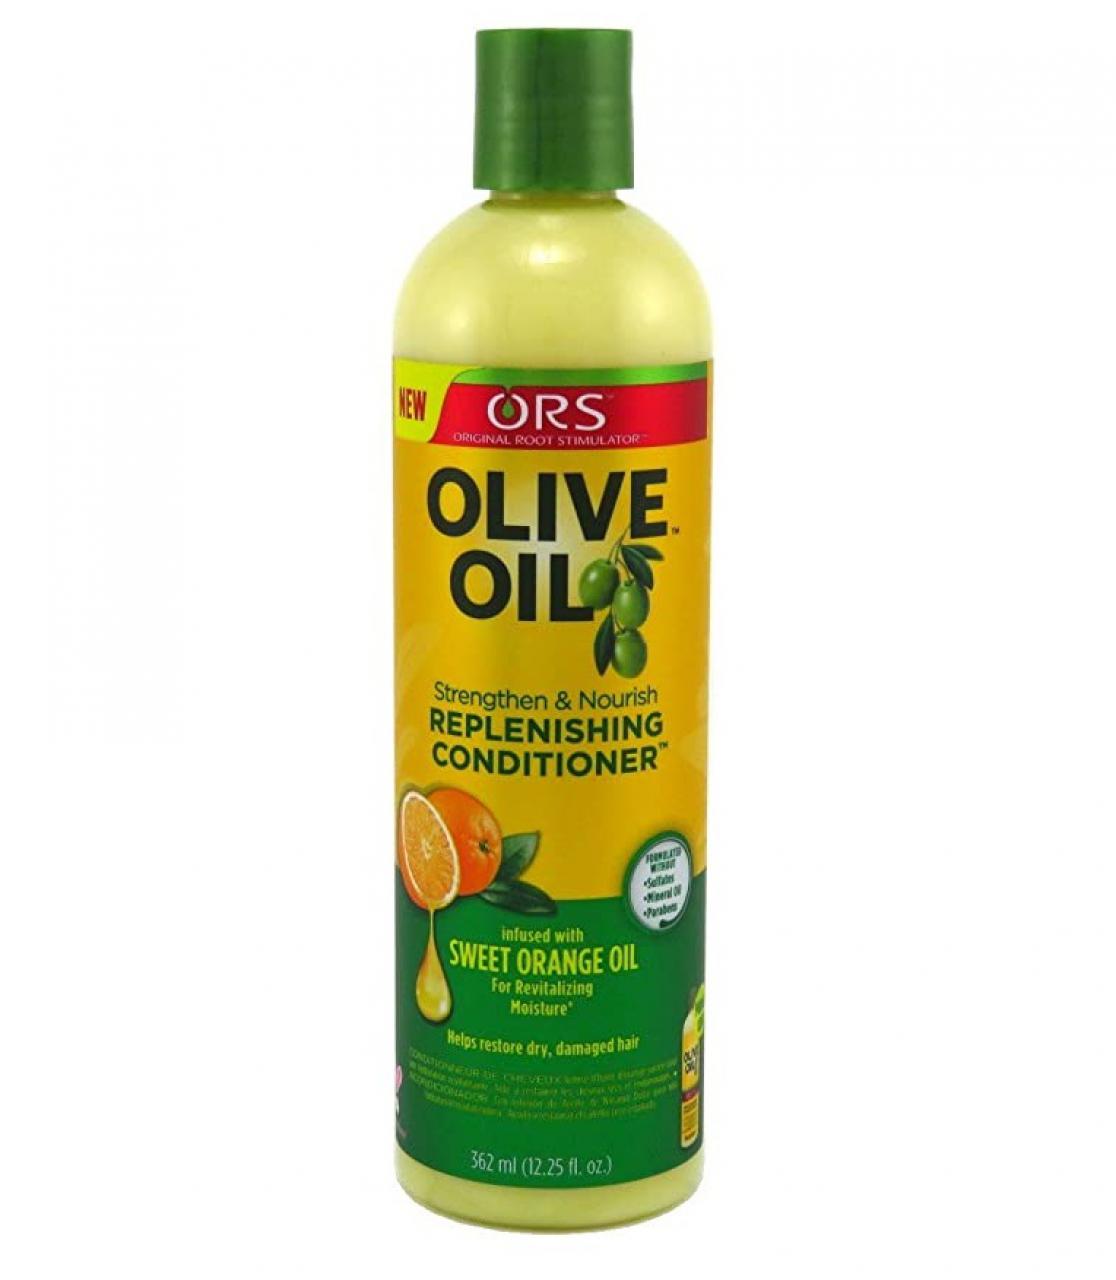 Olive oil replenishing conditioner